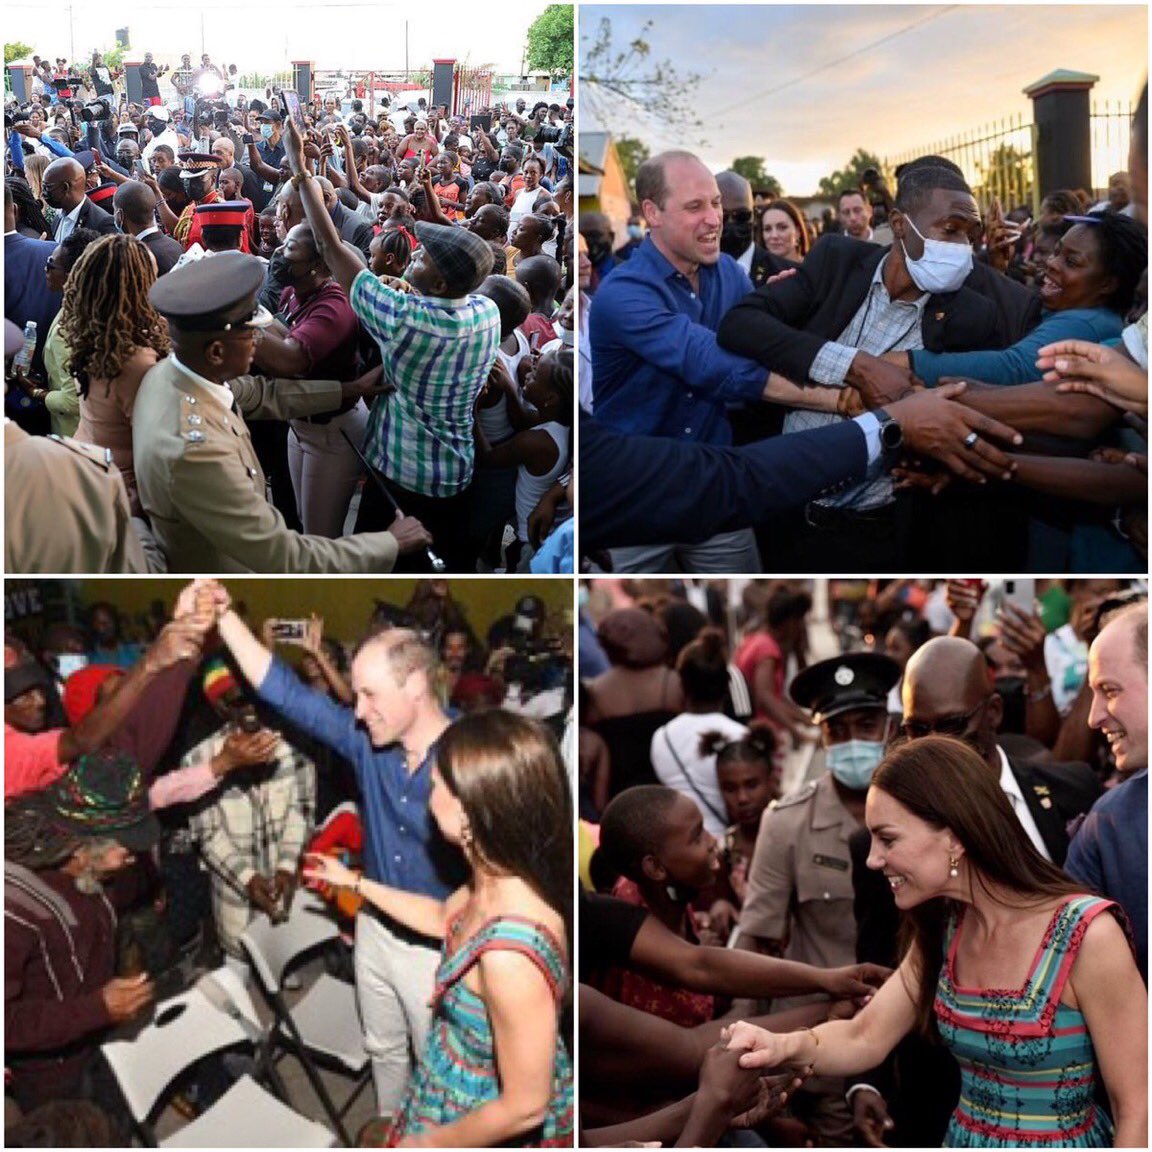 This is why people like Omid Scobie and Chris Ship tried to trash the Prince and Princess of Wales Caribbean tour, because their fave was met with protests while William and Catherine were met with adoring crowds. Huge swathes of the Royal Press wanted Harry and Meghan’s lies to